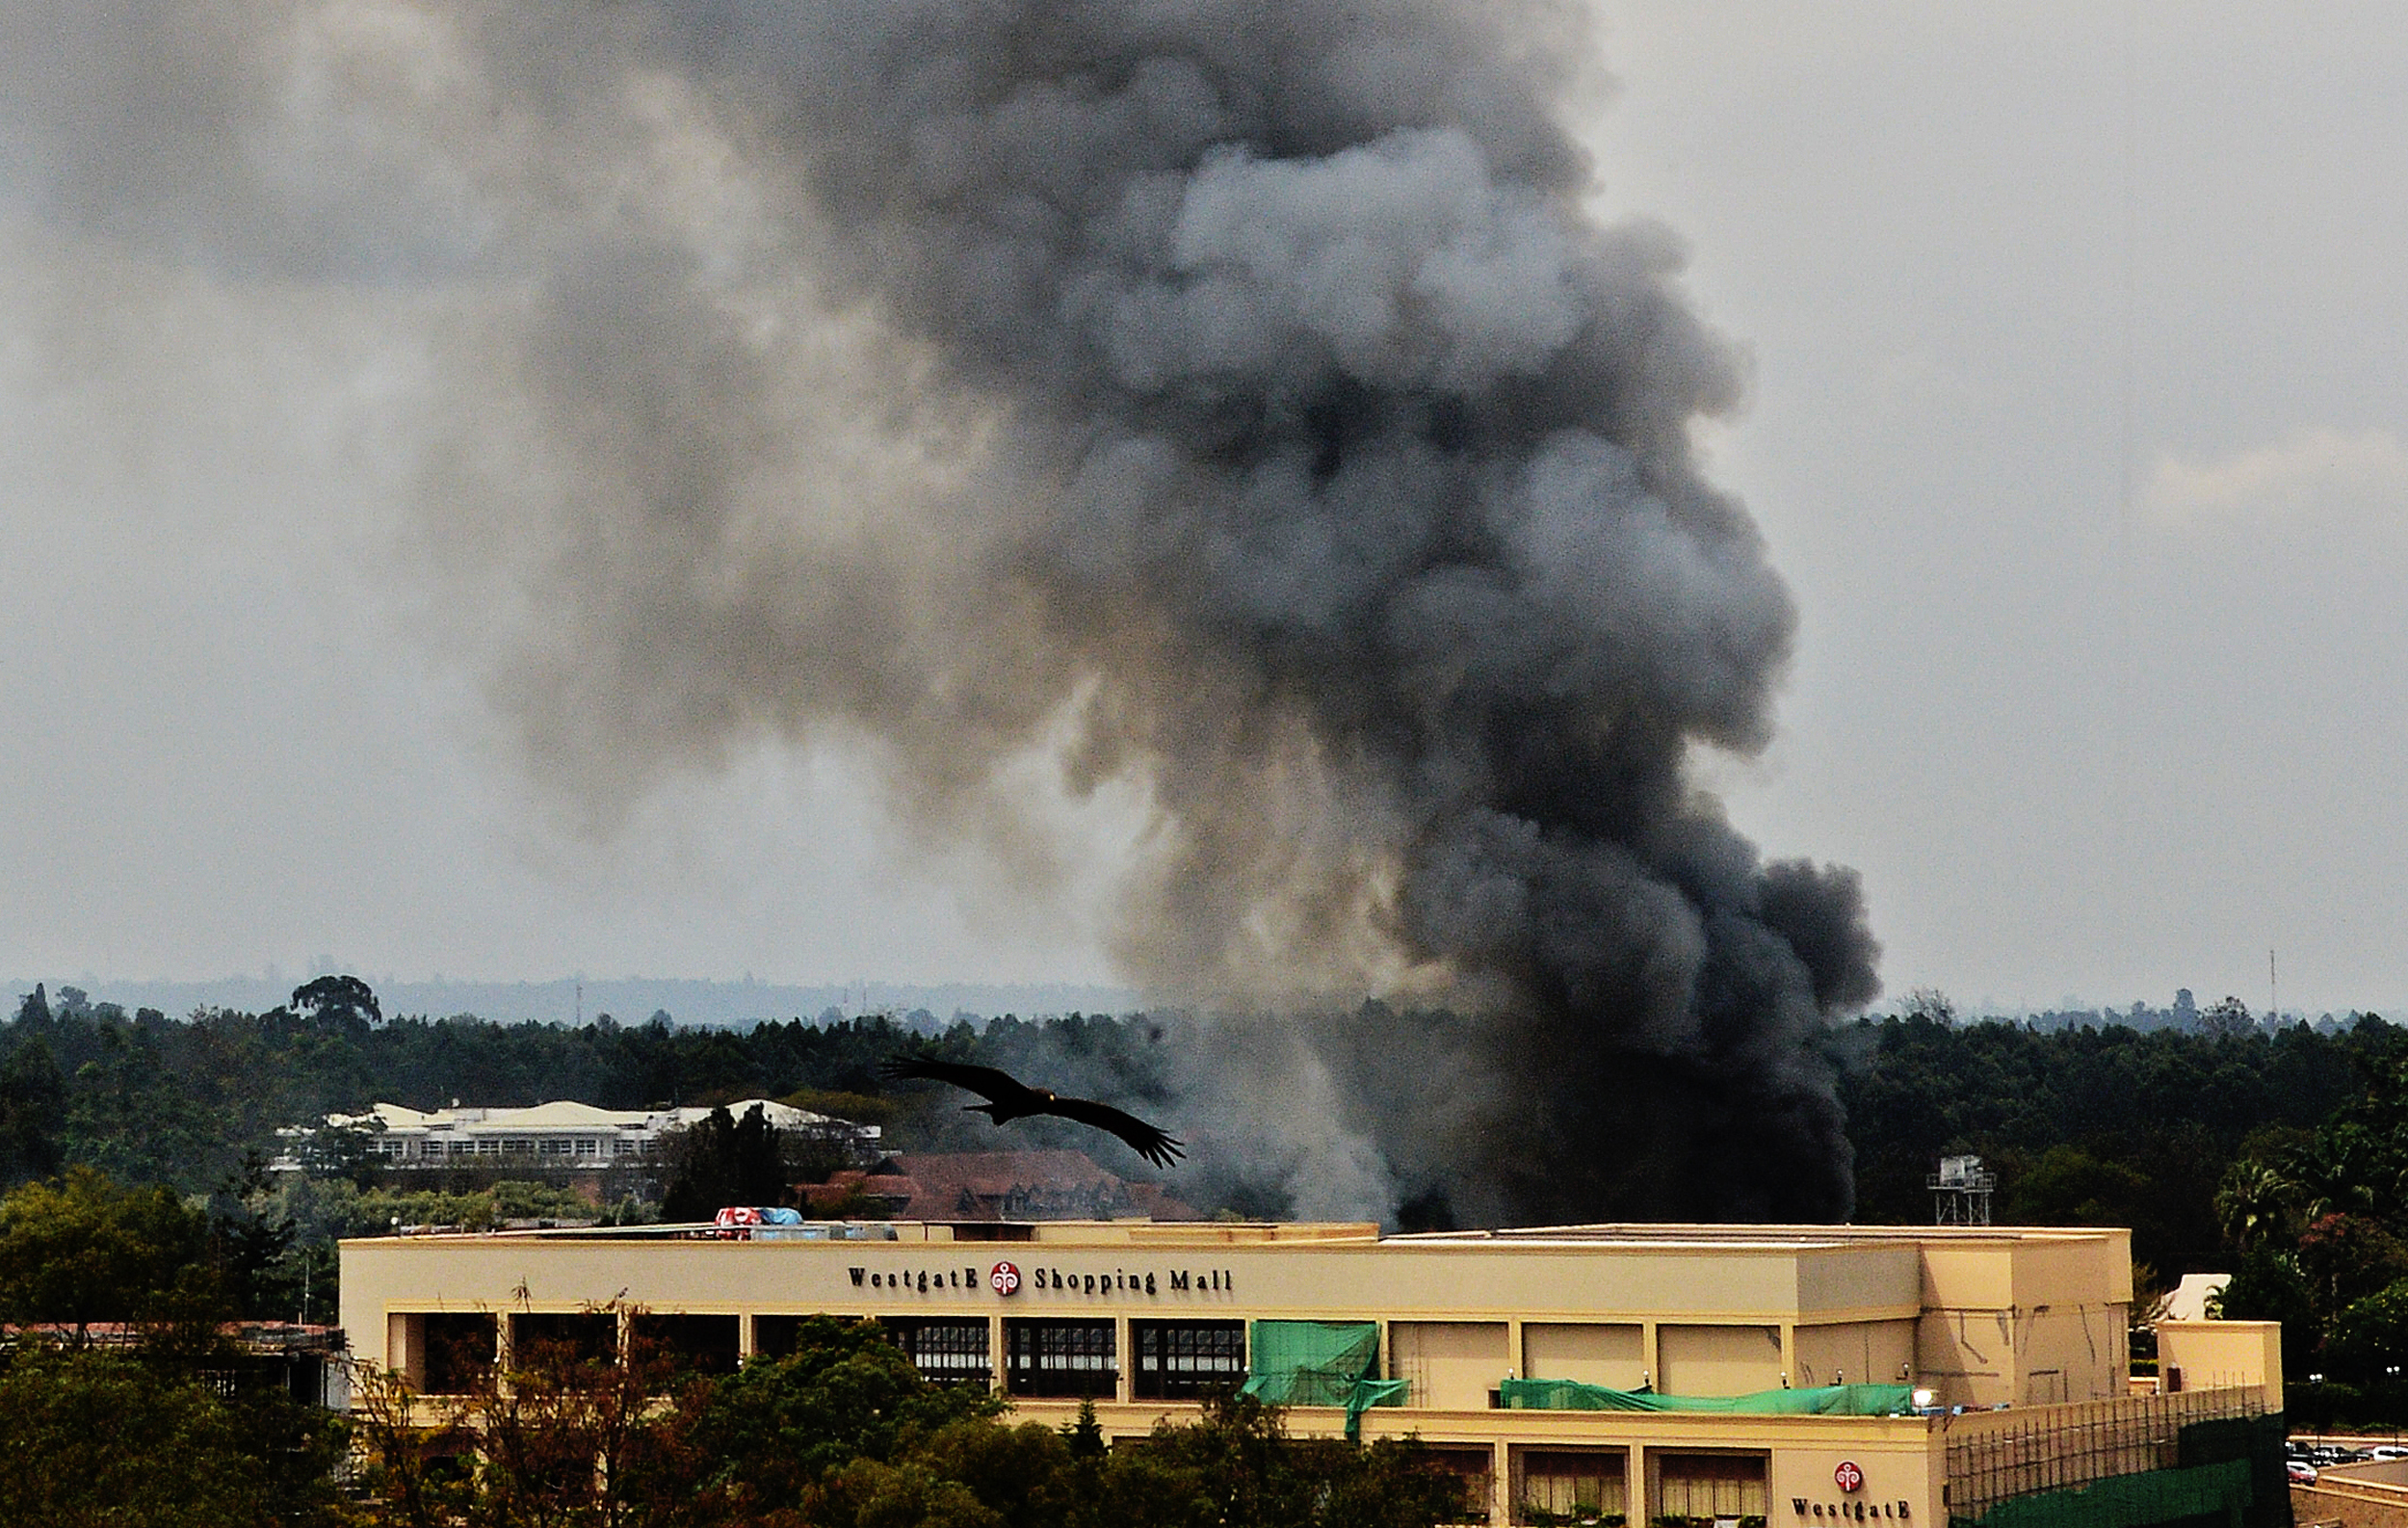 Smoke rises from the Westgate mall in Nairobi on September 23, 2013. (Photo: CARL DE SOUZA/AFP/Getty Images)